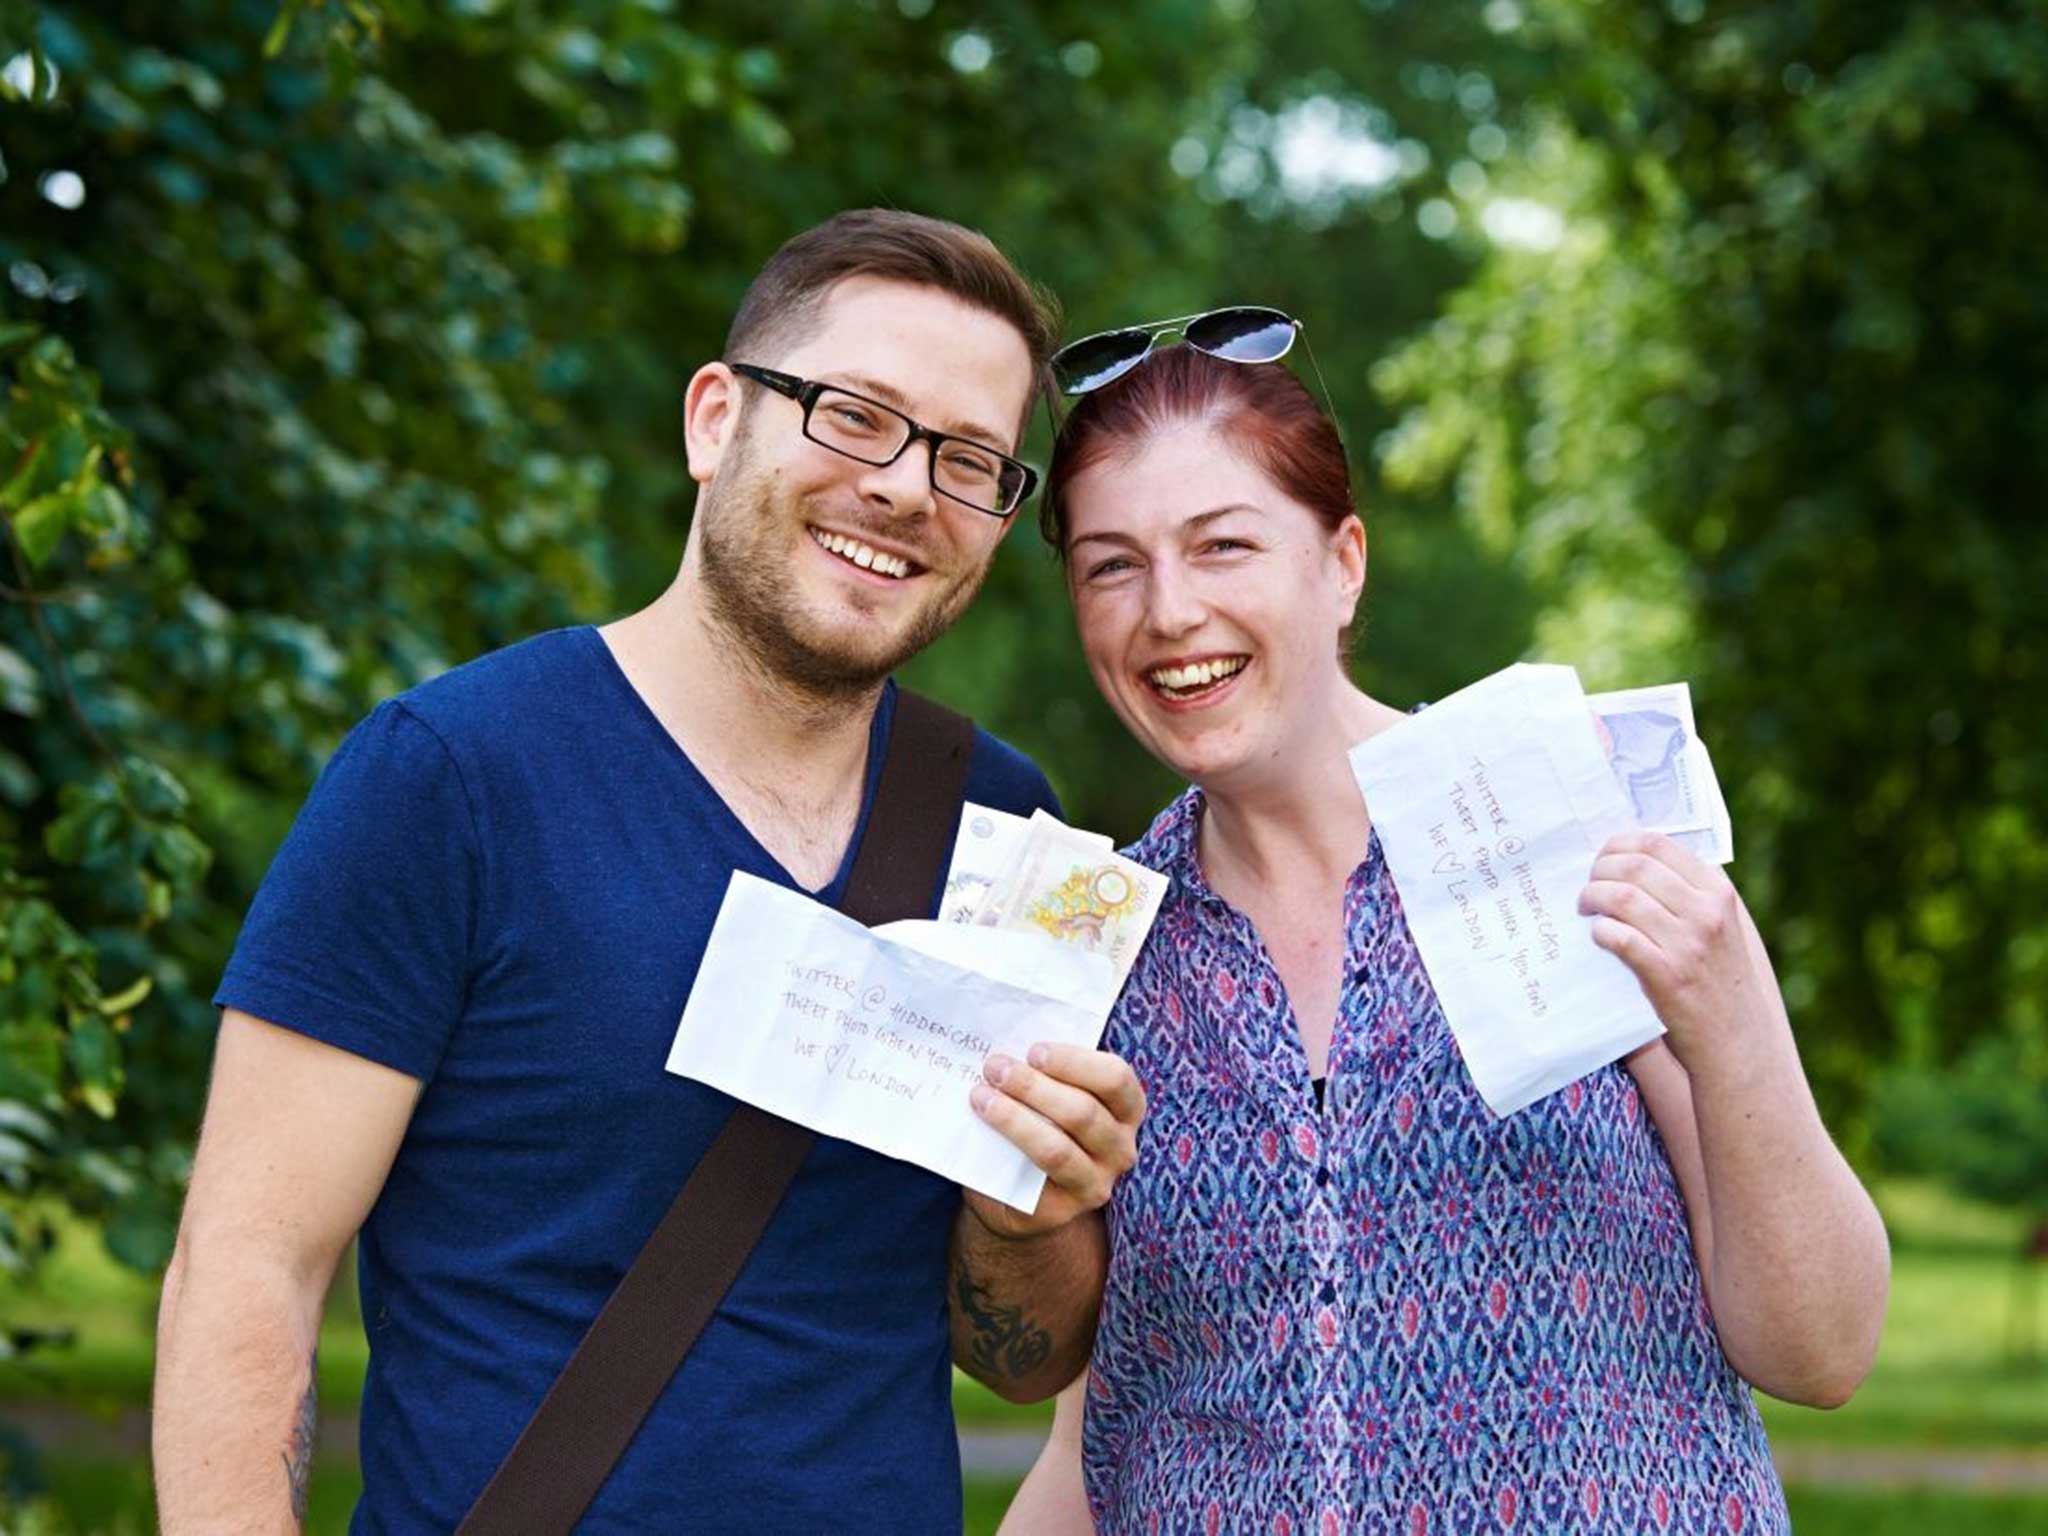 Quids in Adam Mills and Jane Fletcher were among the lucky cash hunters